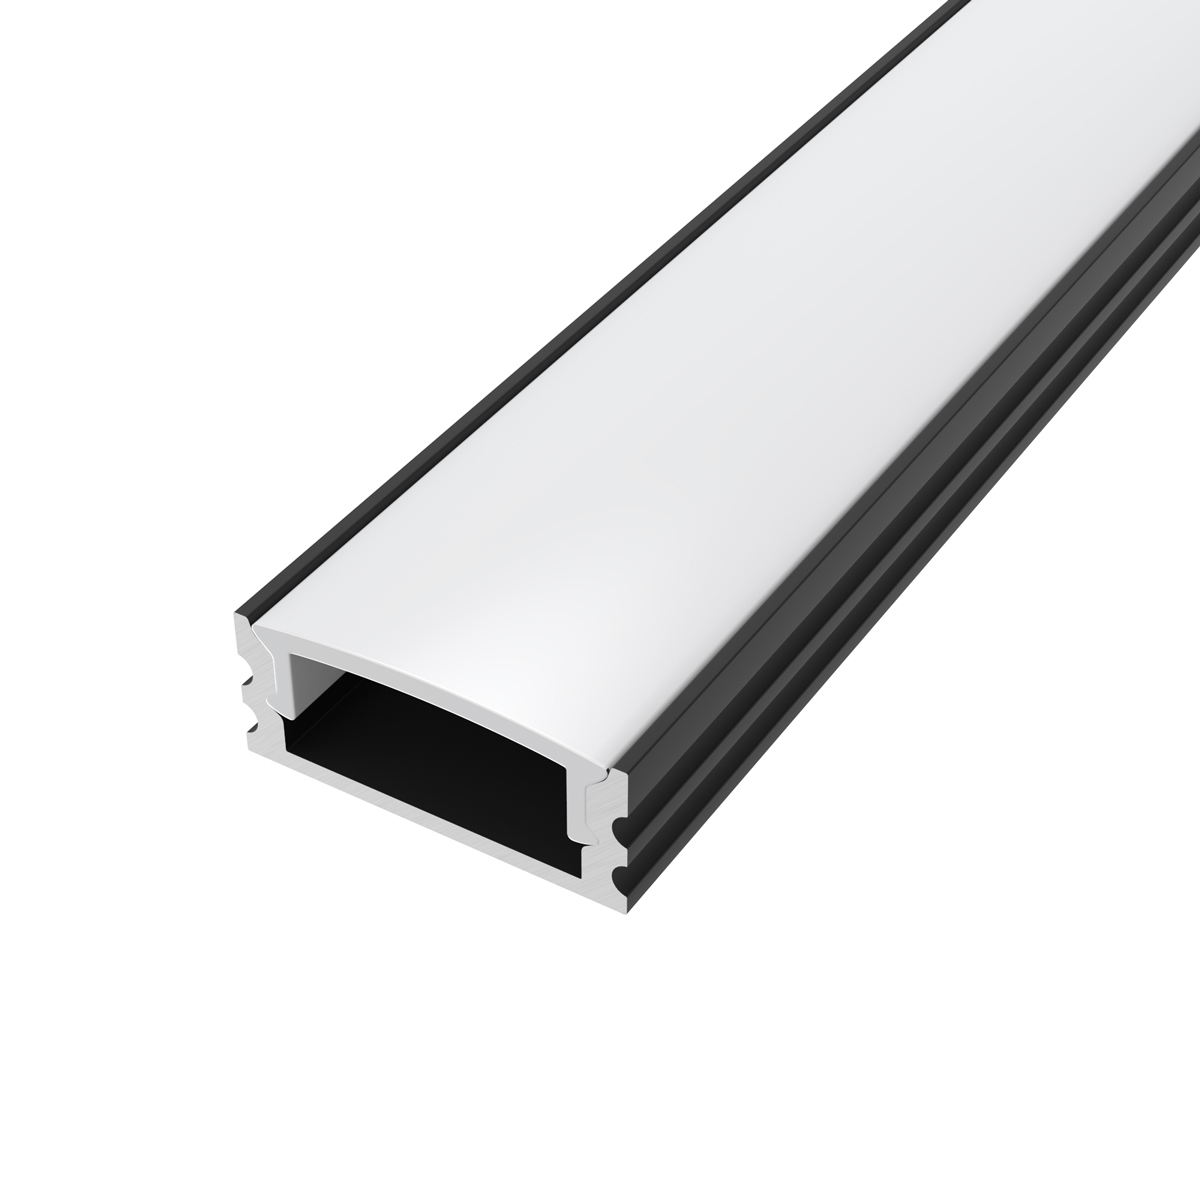 View 2m LED Profile Black Slimline With Diffuser Incl End Caps and Brackets information